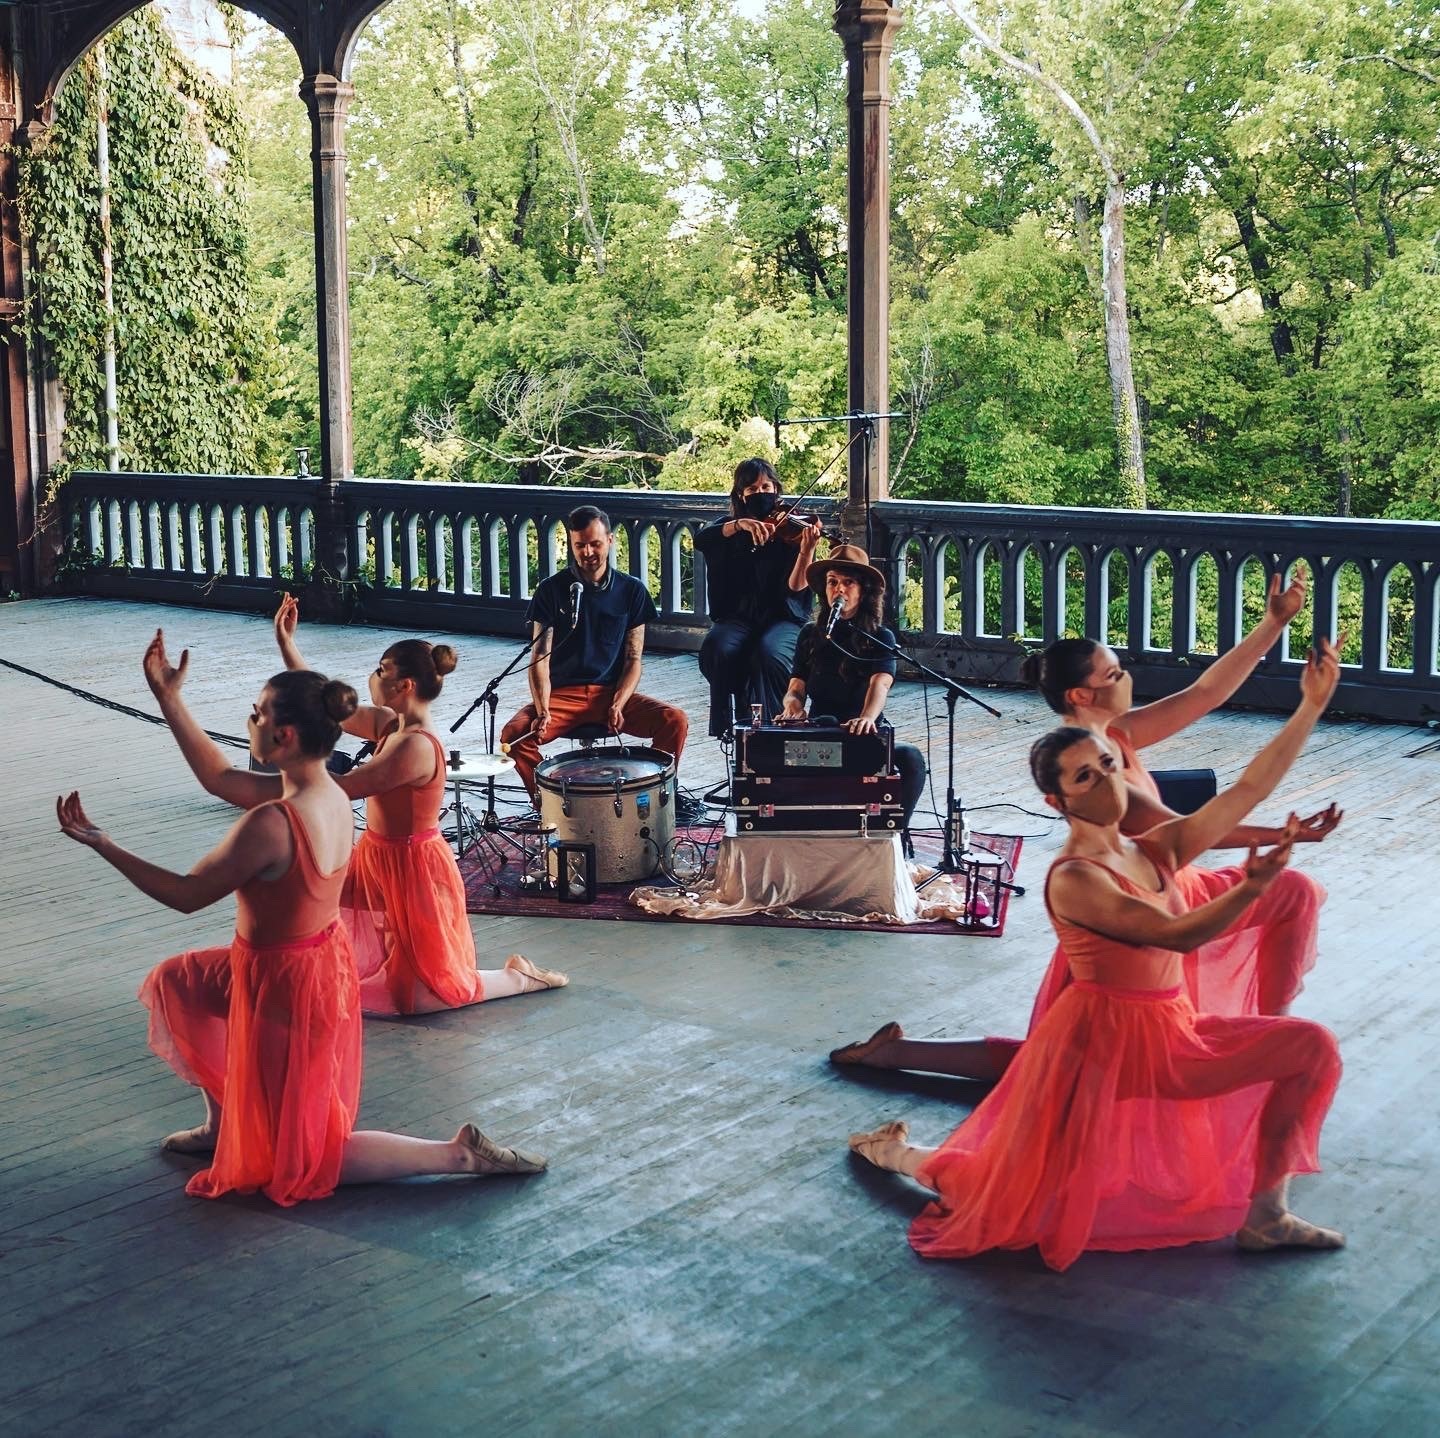 Høly River Music & the Concert Ballet of Virginia Present: Ballet in the Garden, Image by Christopher Risch